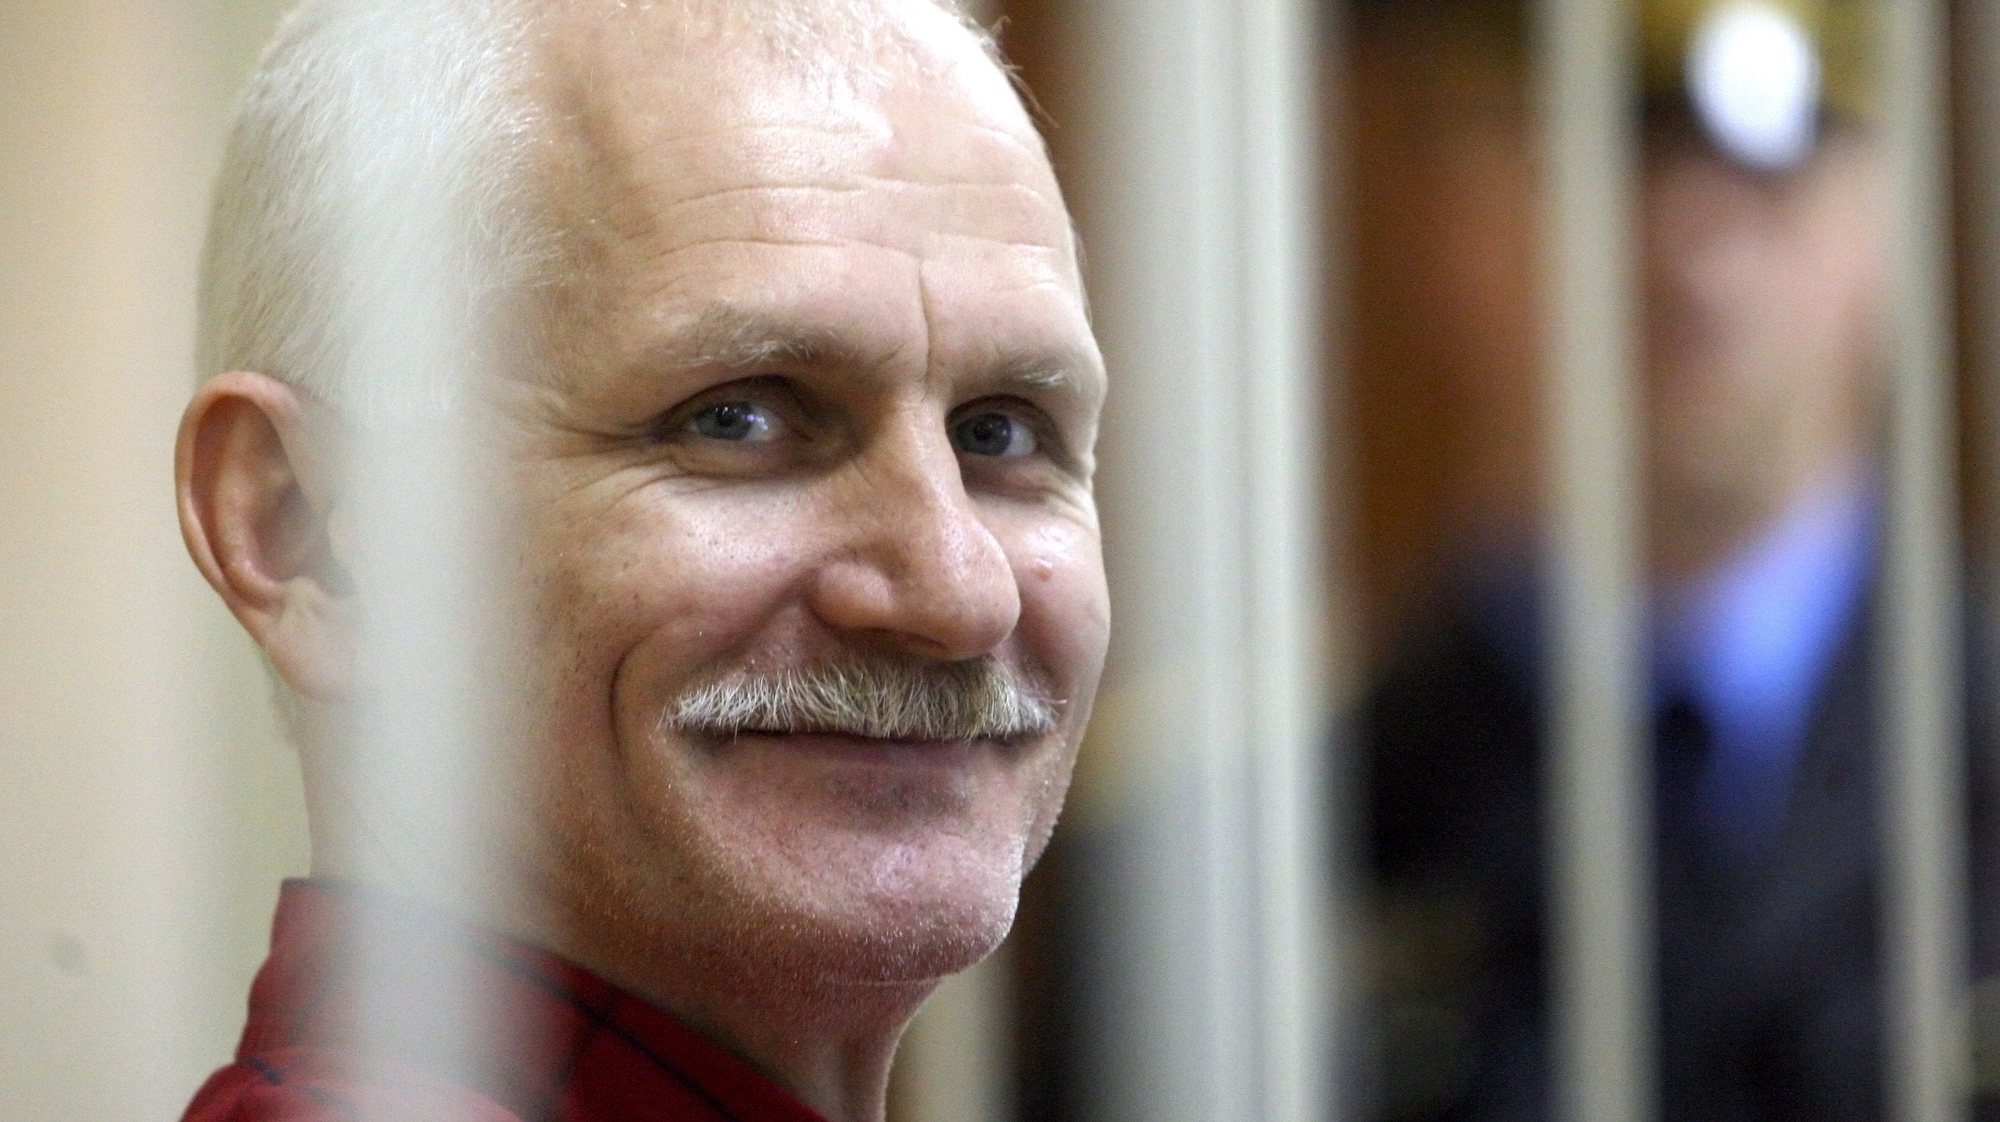 epa10228770 (FILE) - Belarusian human rights activist Ales Bialiatski (also transliterated as Alex Belyatsky), leader of Viasna, a human rights group based in Minsk, smiles as he waits in a trial cage inside a courtroom prior to a court session in Minsk, Belarus, 24 November 2011 (reissued 07 October 2022). The Nobel Peace Prize 2022 has been awarded to human rights advocate Ales Bialiatski from Belarus, the Russian human rights organization Memorial and the Ukrainian human rights organization Center for Civil Liberties. The Norwegian Nobel Committee said in a statement on 07 Octobe 2022, that by awarding the Nobel Peace Prize for 2022 to Bialiatski, Memorial and the Center for Civil Liberties, it wishes to &#039;honour three outstanding champions of human rights, democracy and peaceful co-existence in the neighbour countries Belarus, Russia and Ukraine.&#039; Bialiatski was imprisoned from 2011 to 2014 and following large-scale demonstrations against the Belarus regime in 2020, he was again arrested and still detained without trial, the Norwegian Nobel Committee added.  EPA/TATYANA ZENKOVICH *** Local Caption *** 50100352